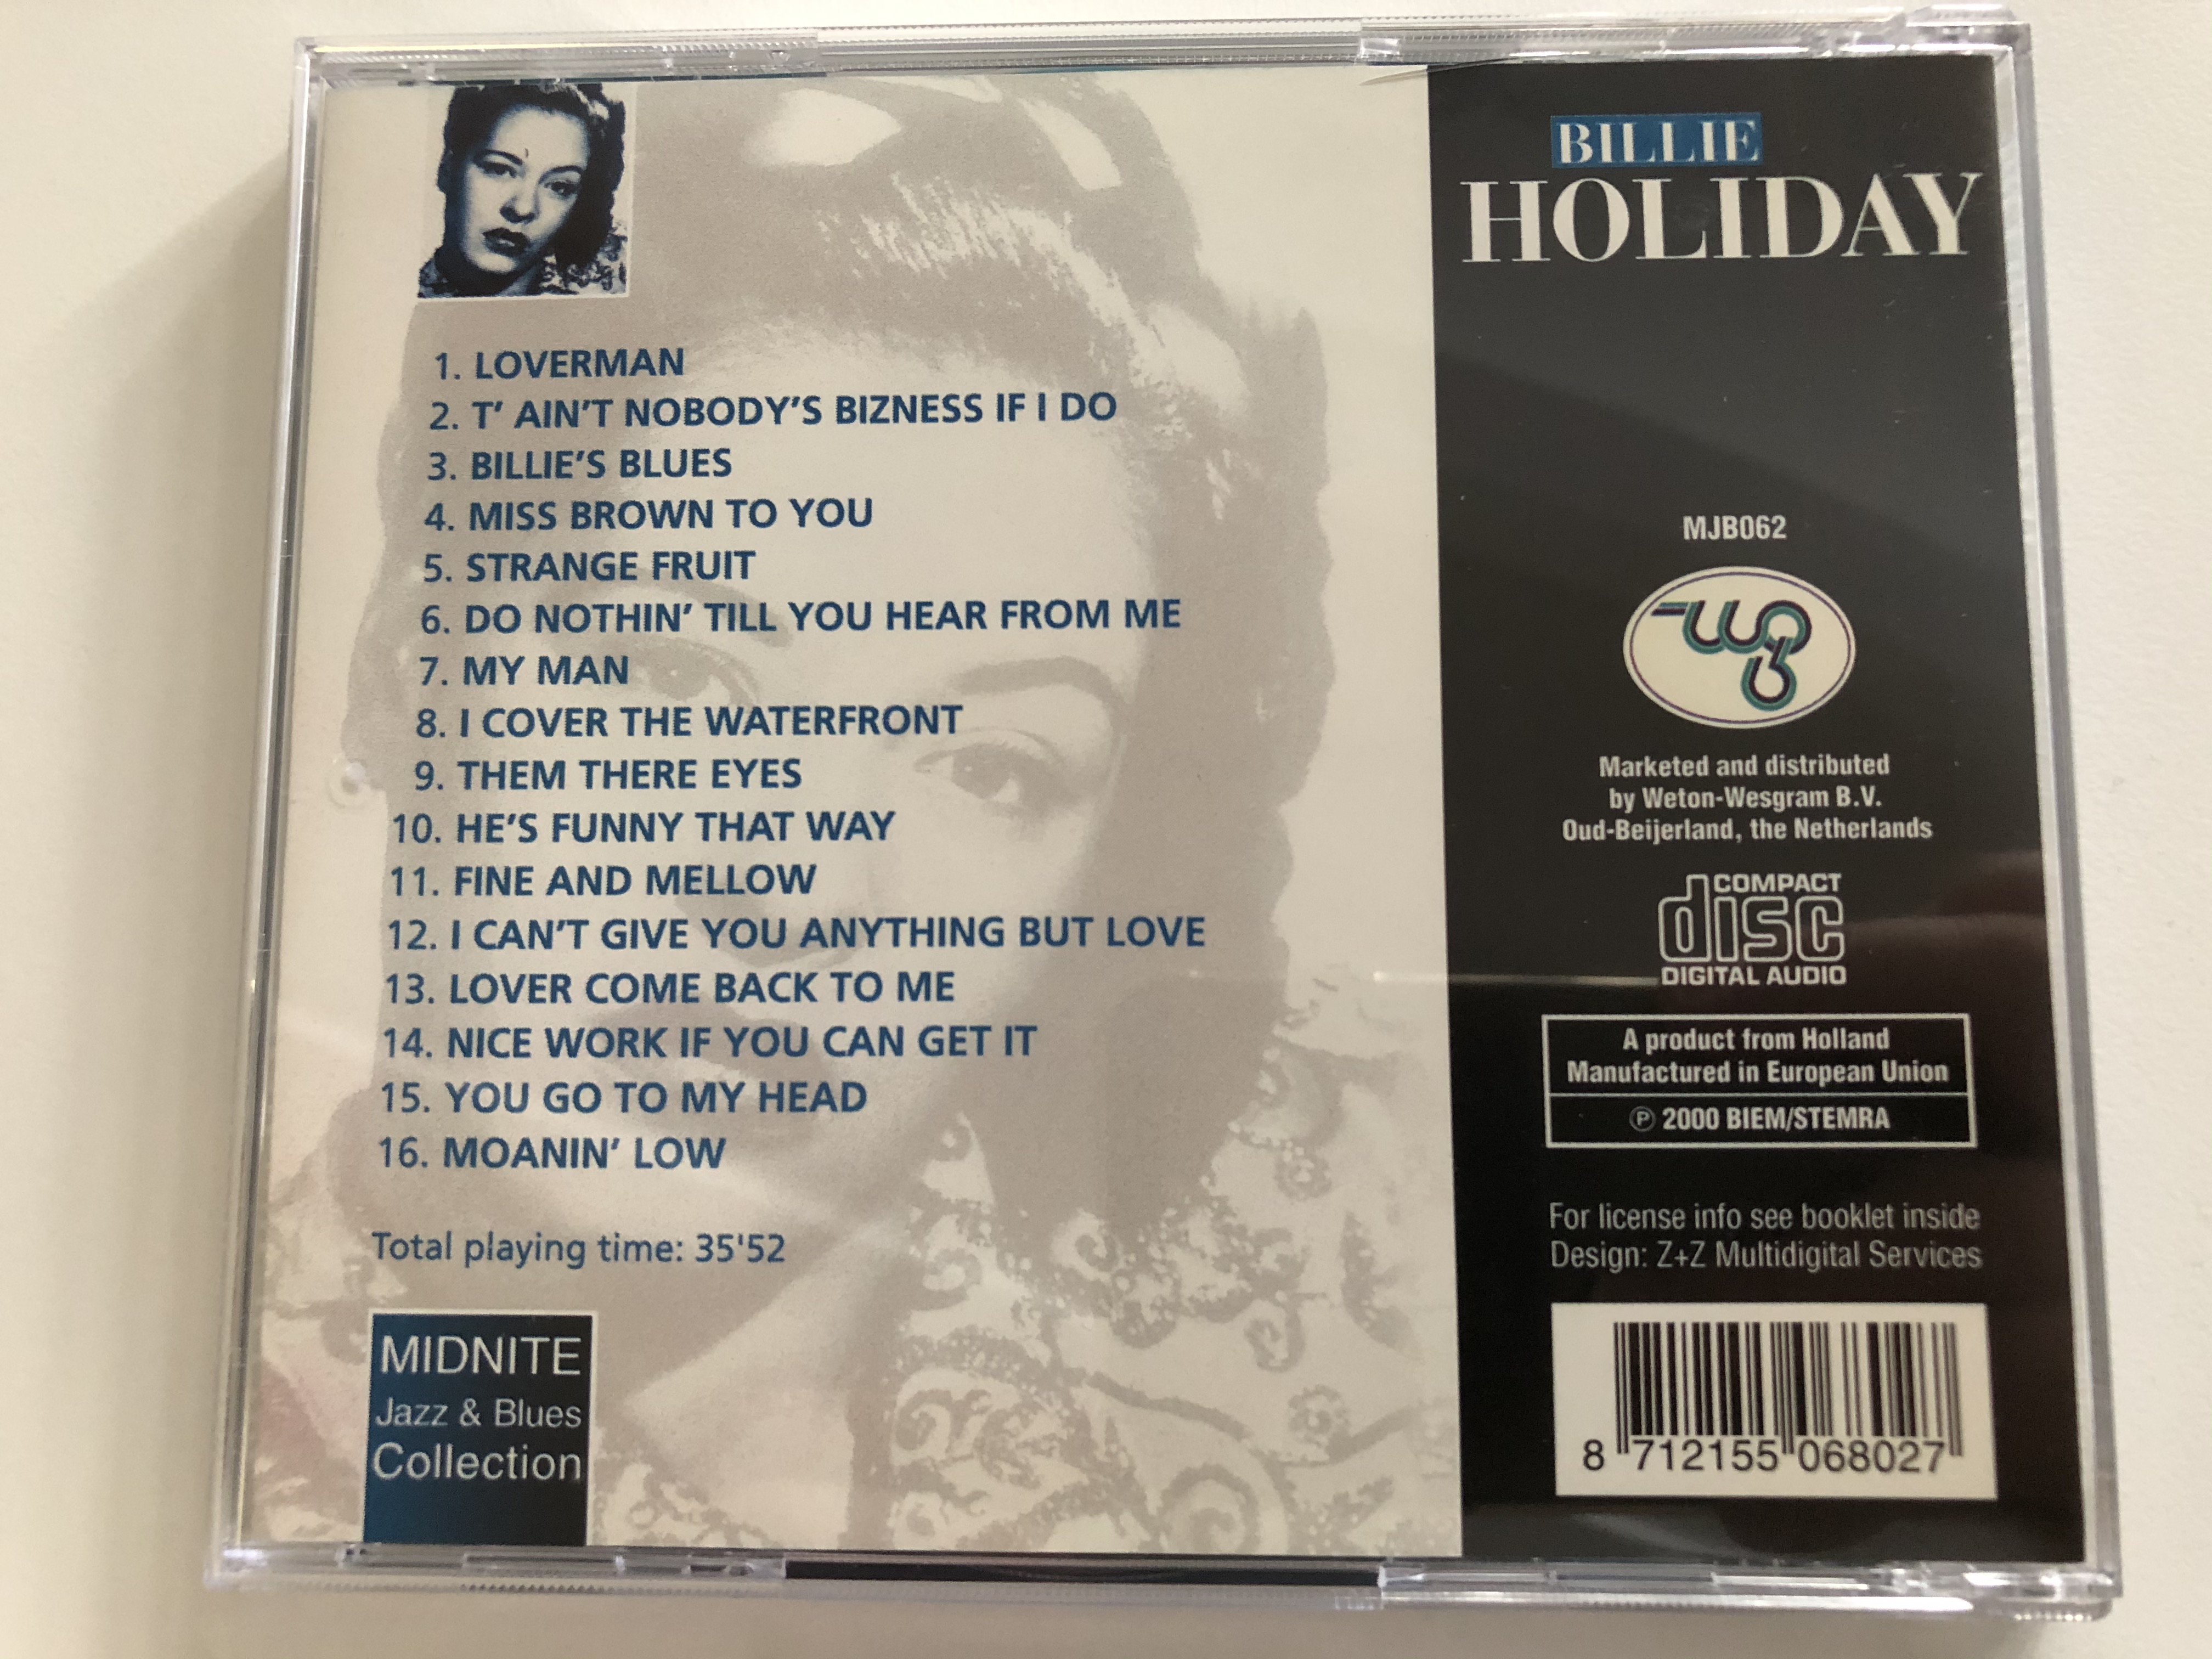 billie-holiday-fine-and-mellow-midnite-jazz-blues-collection-weton-wesgram-audio-cd-2000-mjb062-2-.jpg